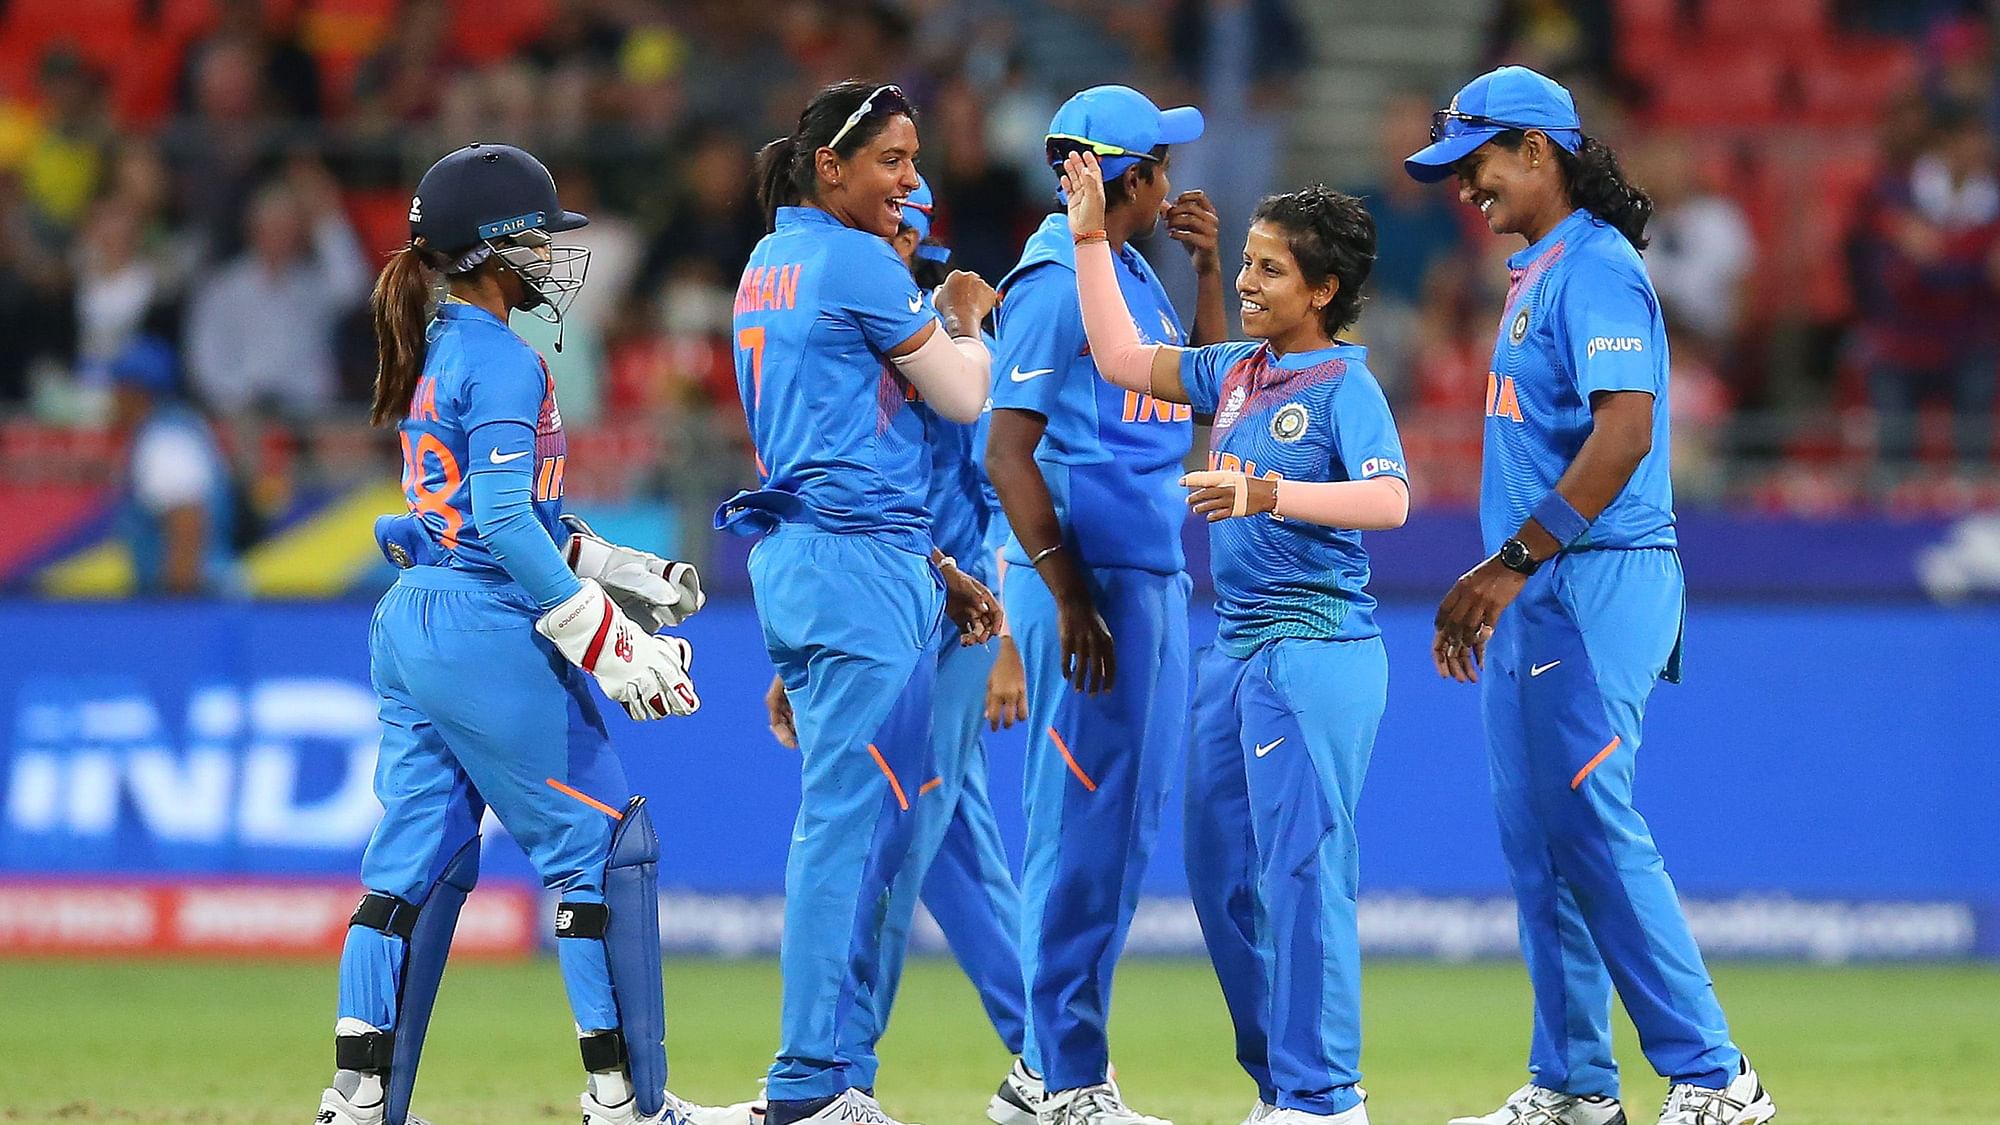 India beat Australia by 17 runs in the inaugural match of the ICC Women’s T20 World Cup in Australia.&nbsp;